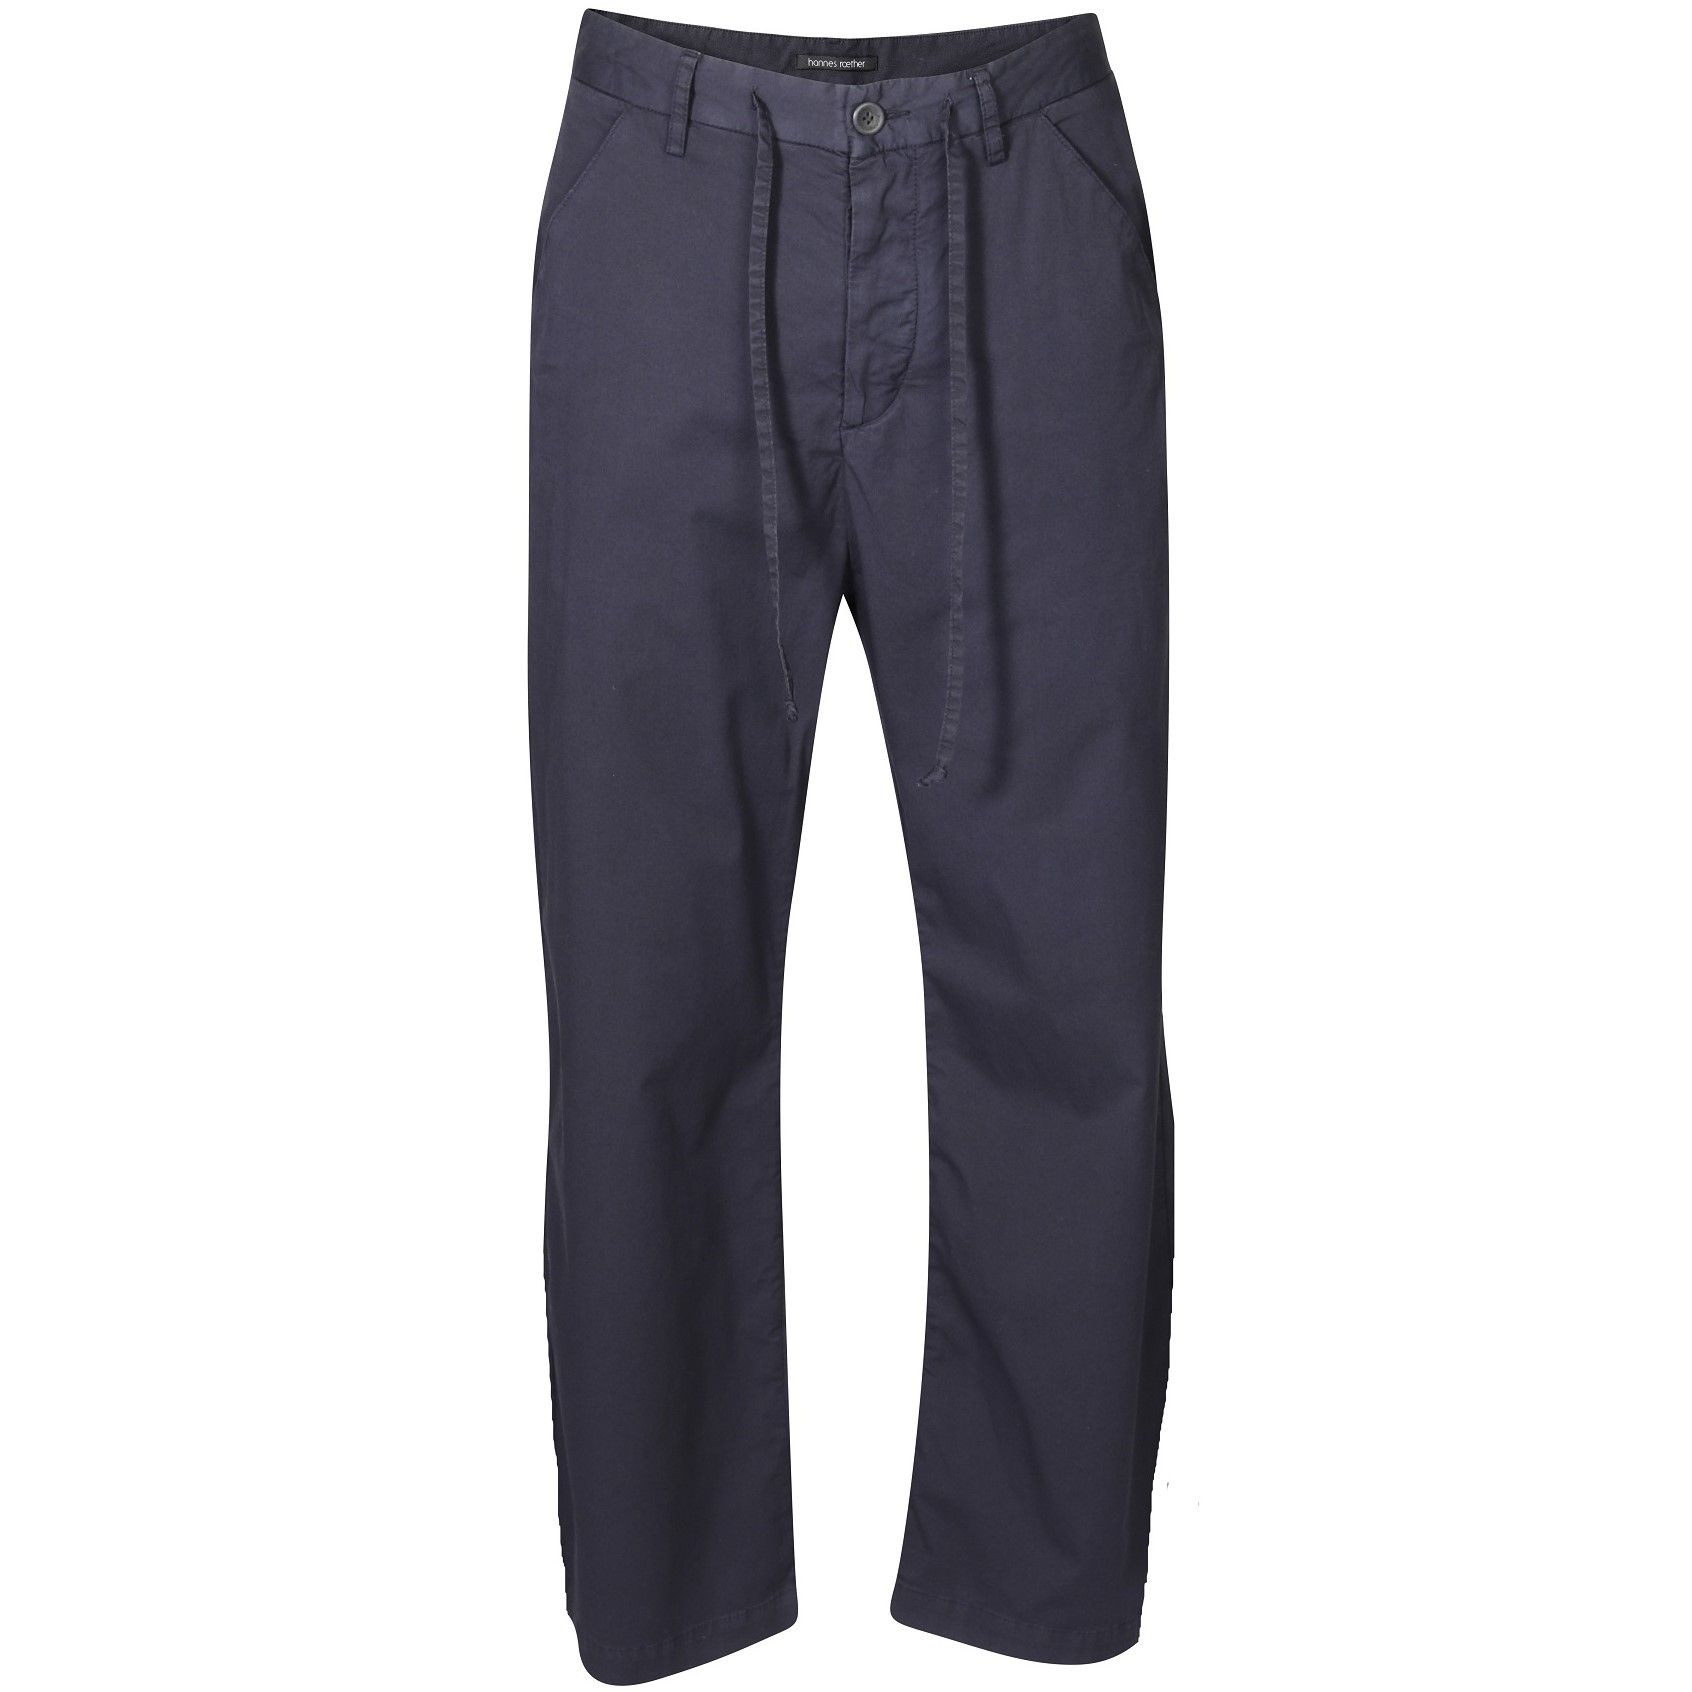 HANNES ROETHER Cotton Pant in Tornado